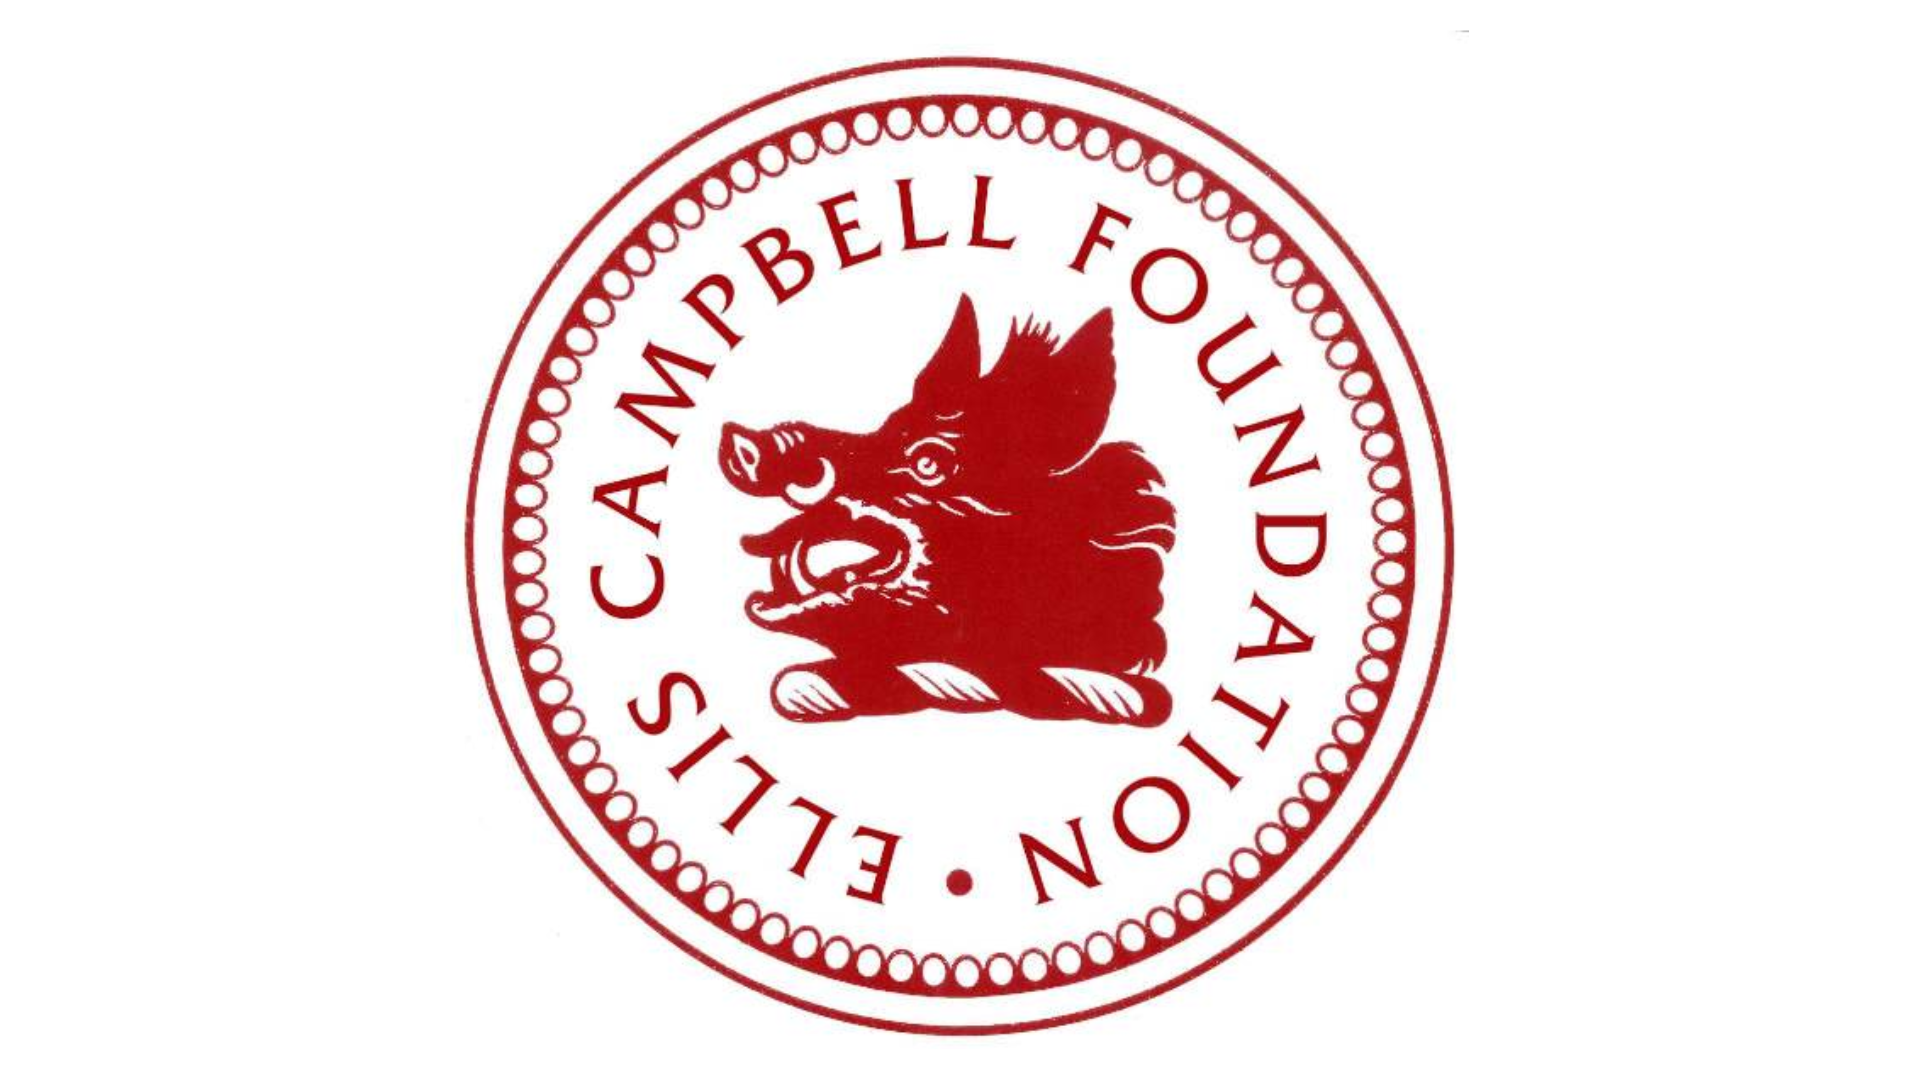 The Ellis Campbell Foundation